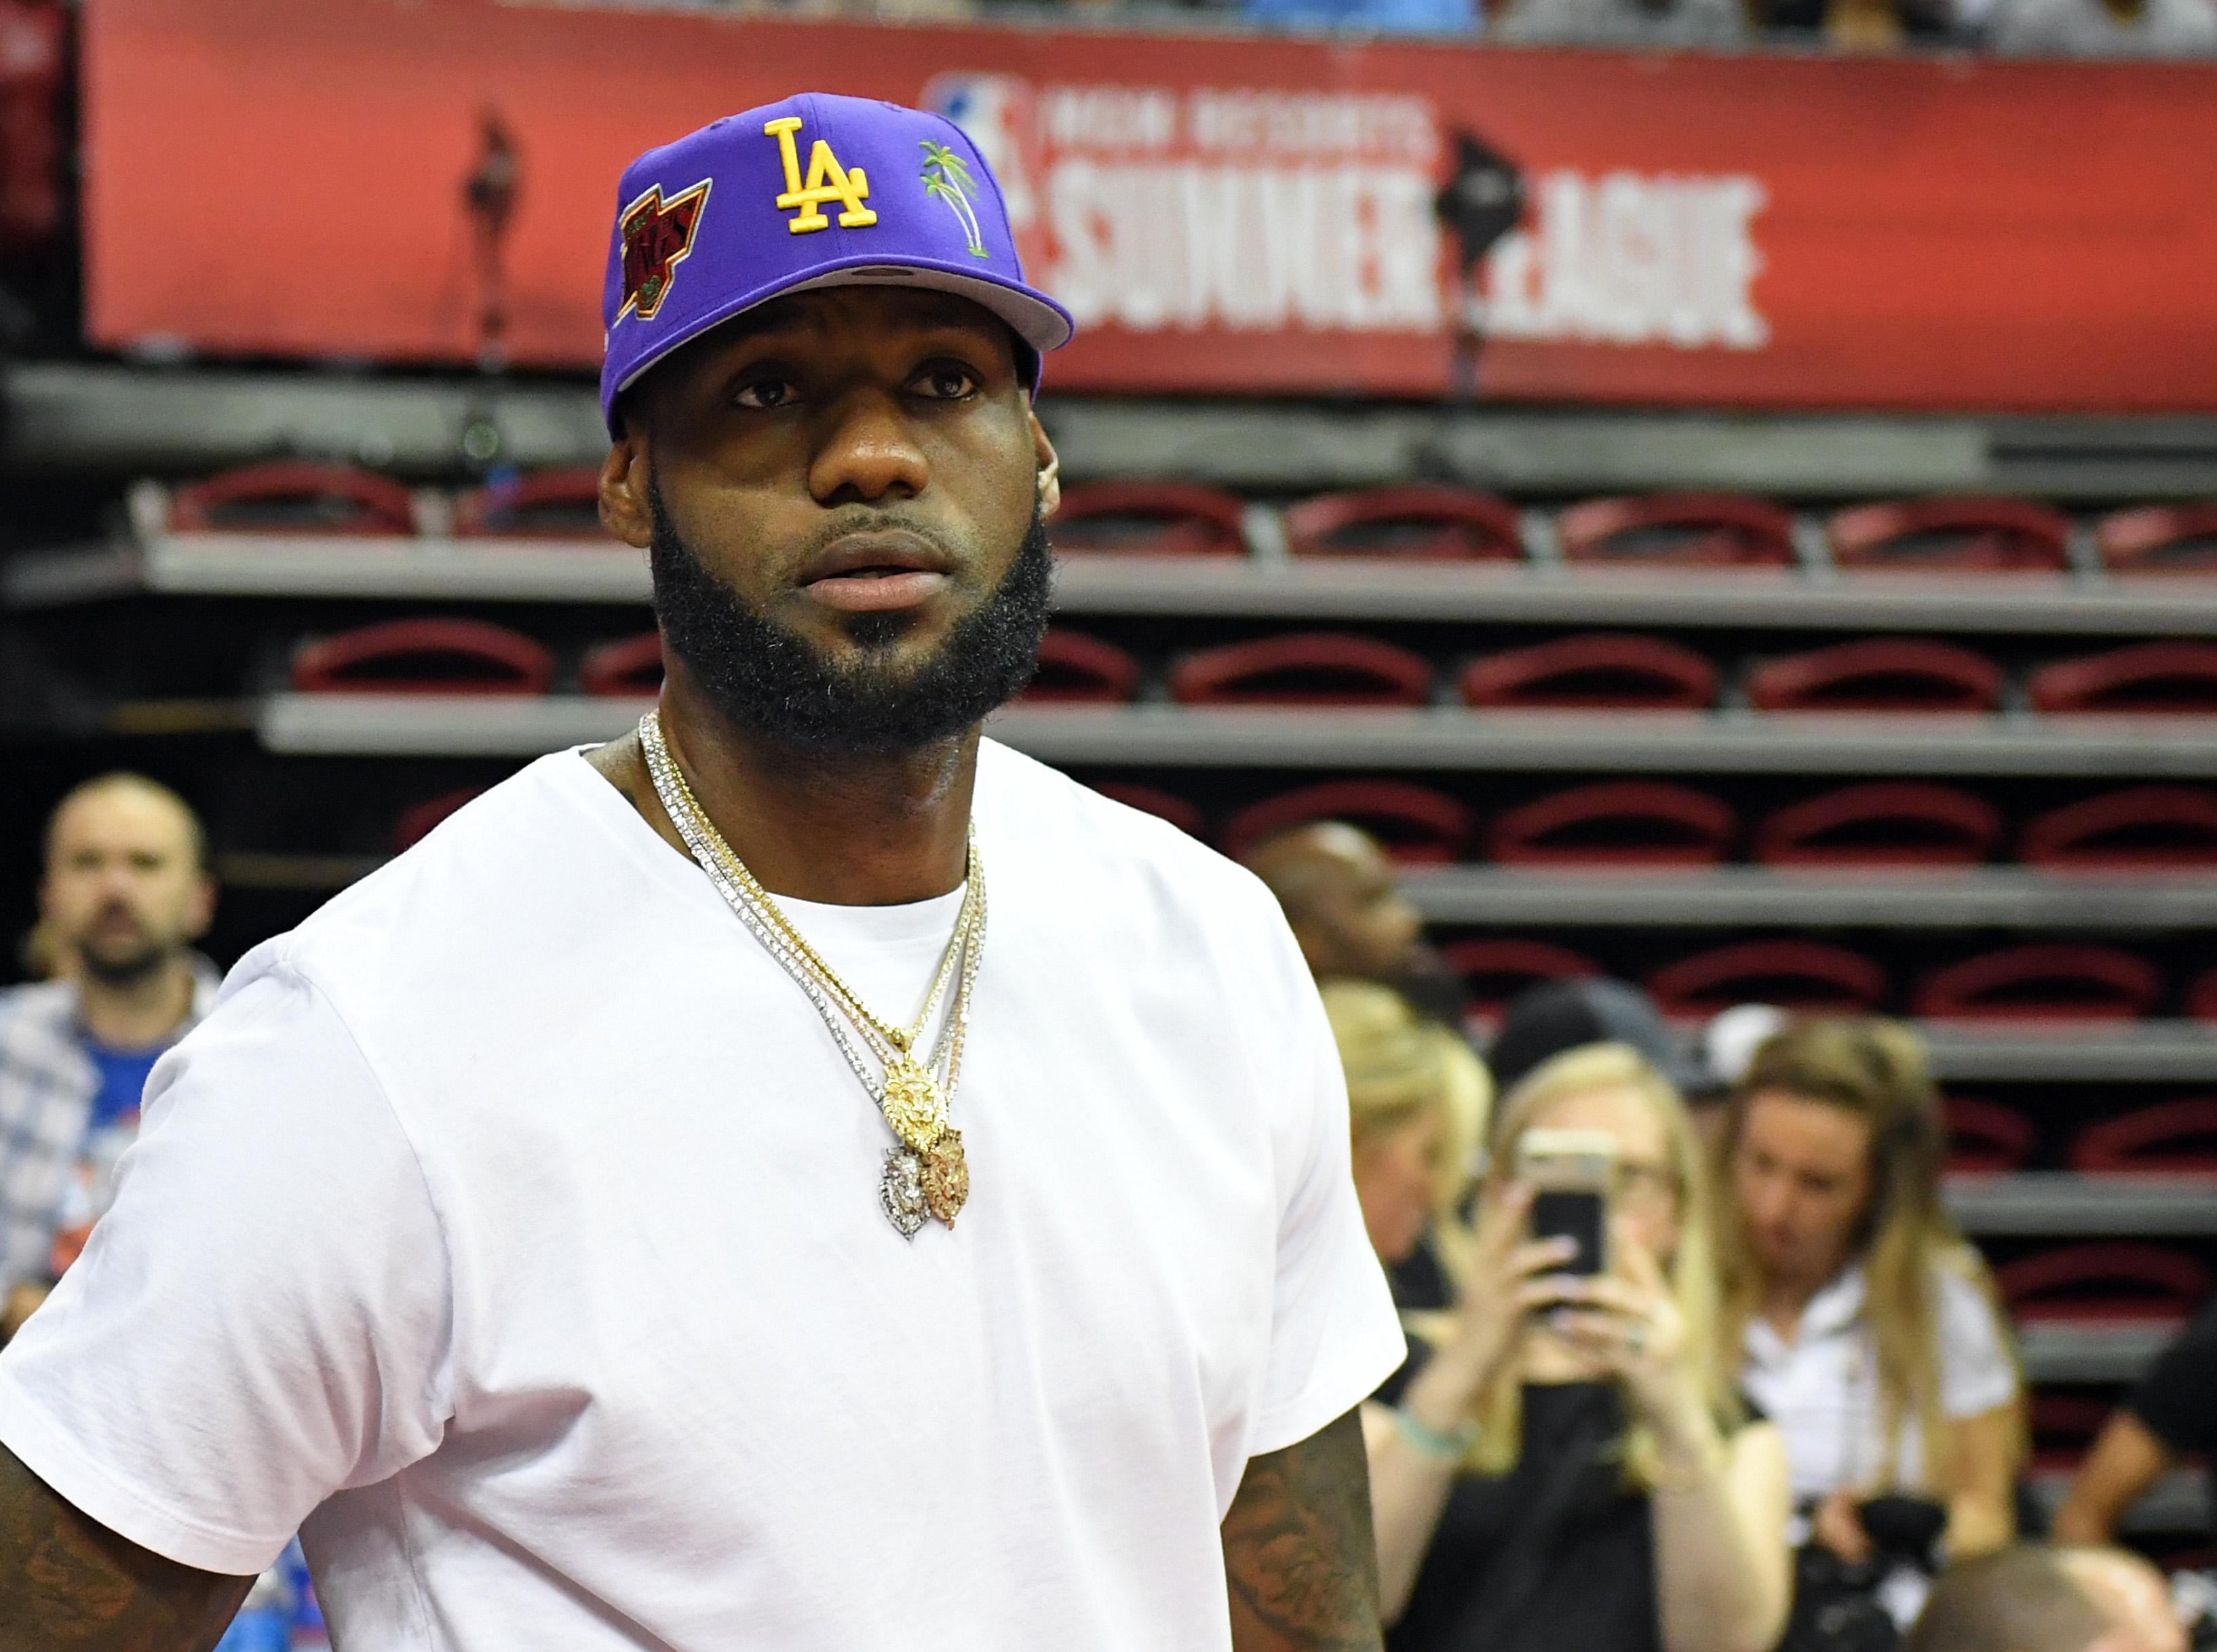 LeBron James Teases Space Jam 2 Jersey During Taco Tuesday: Watch